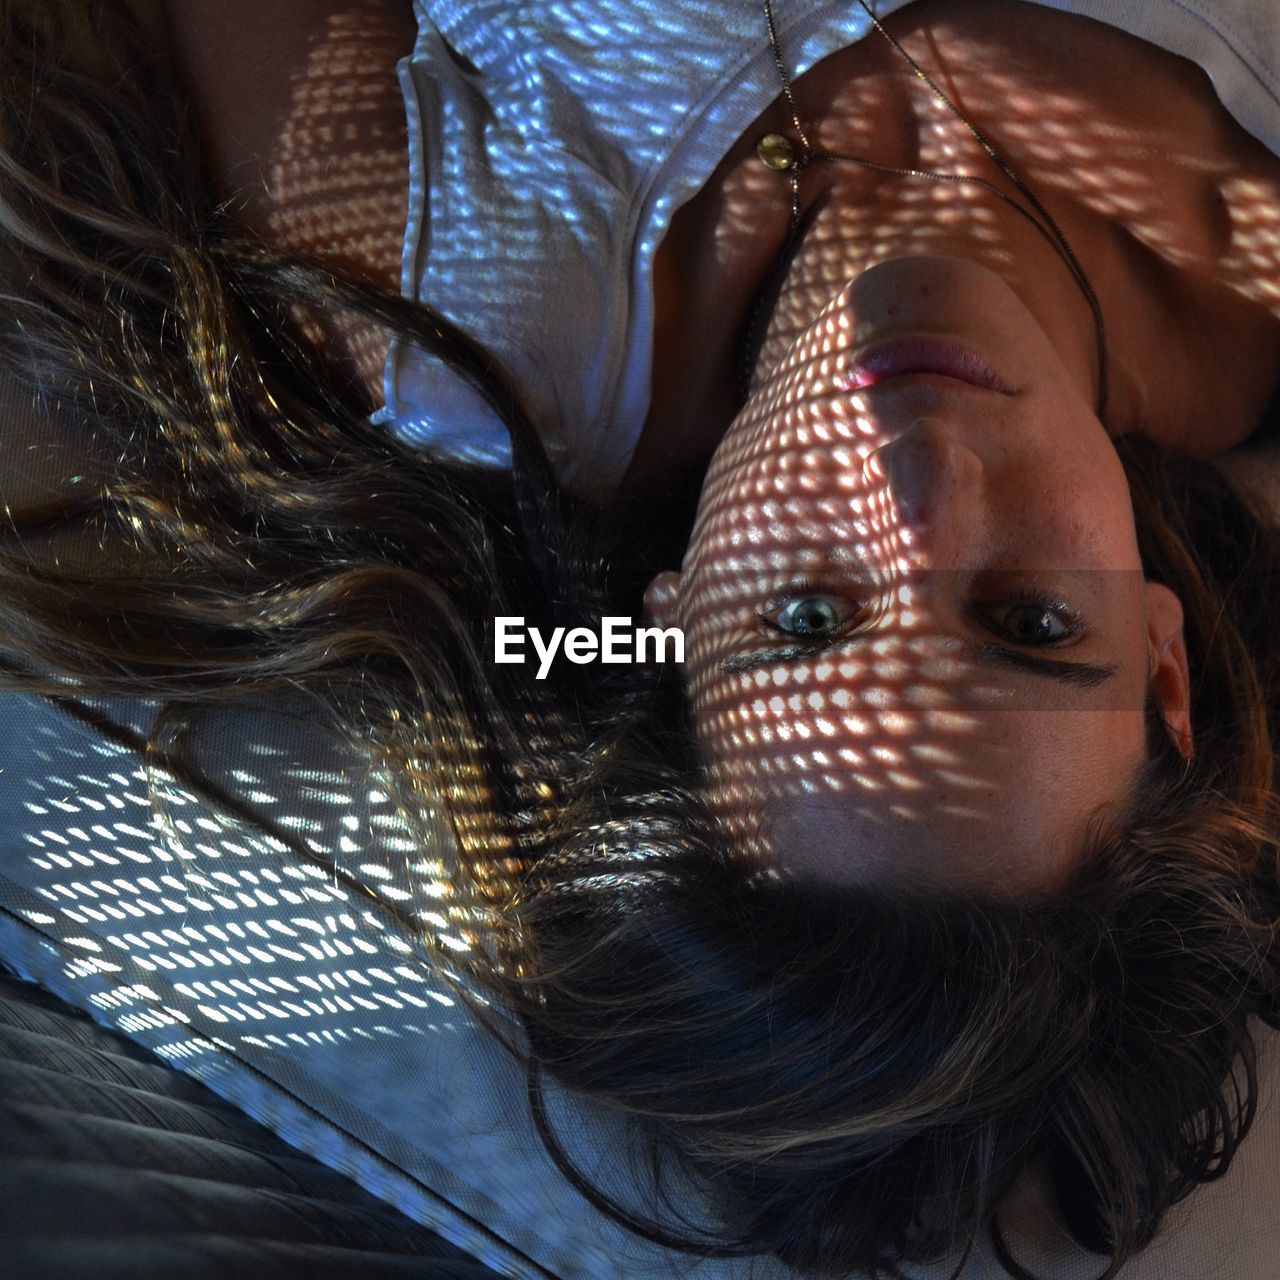 Upside down portrait image of young woman lying on wooden floor